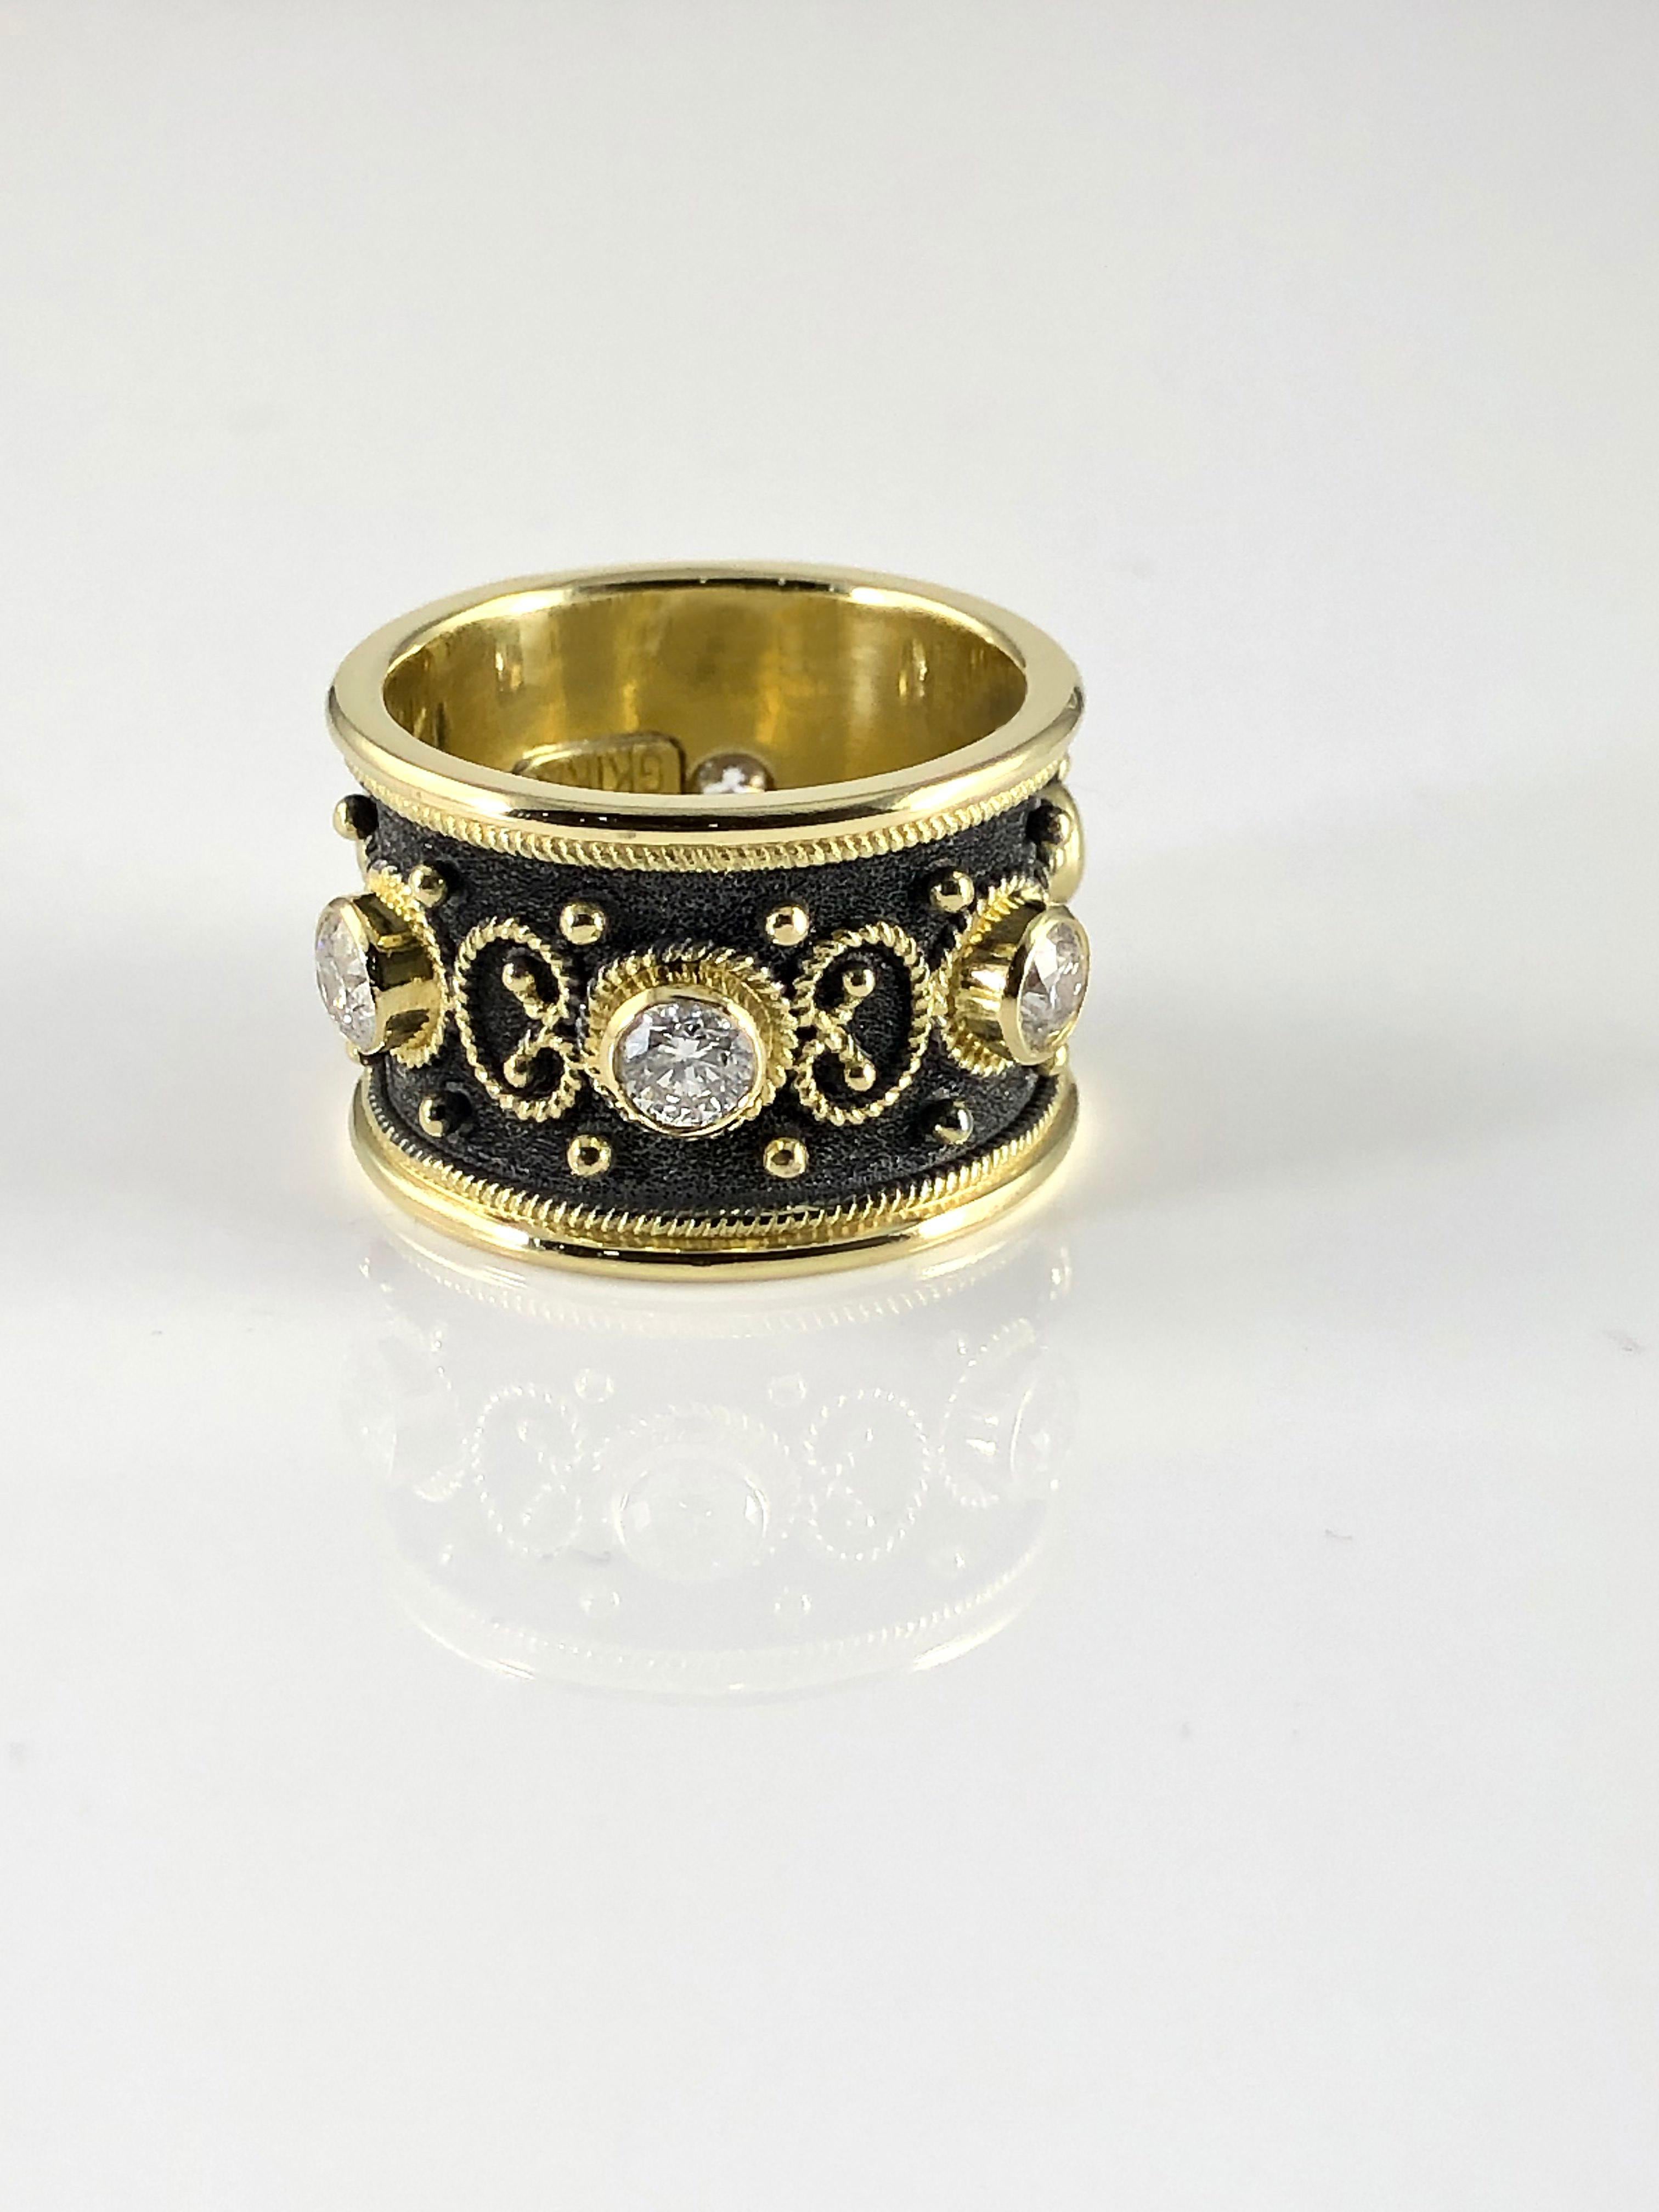 S.Georgios designer Eternity custom-made Band Ring all handmade from solid 18 Karat Yellow Gold. The stunning ring is microscopically decorated all the way around with yellow gold beads and wires shaped like the last letter of the Greek Alphabet -